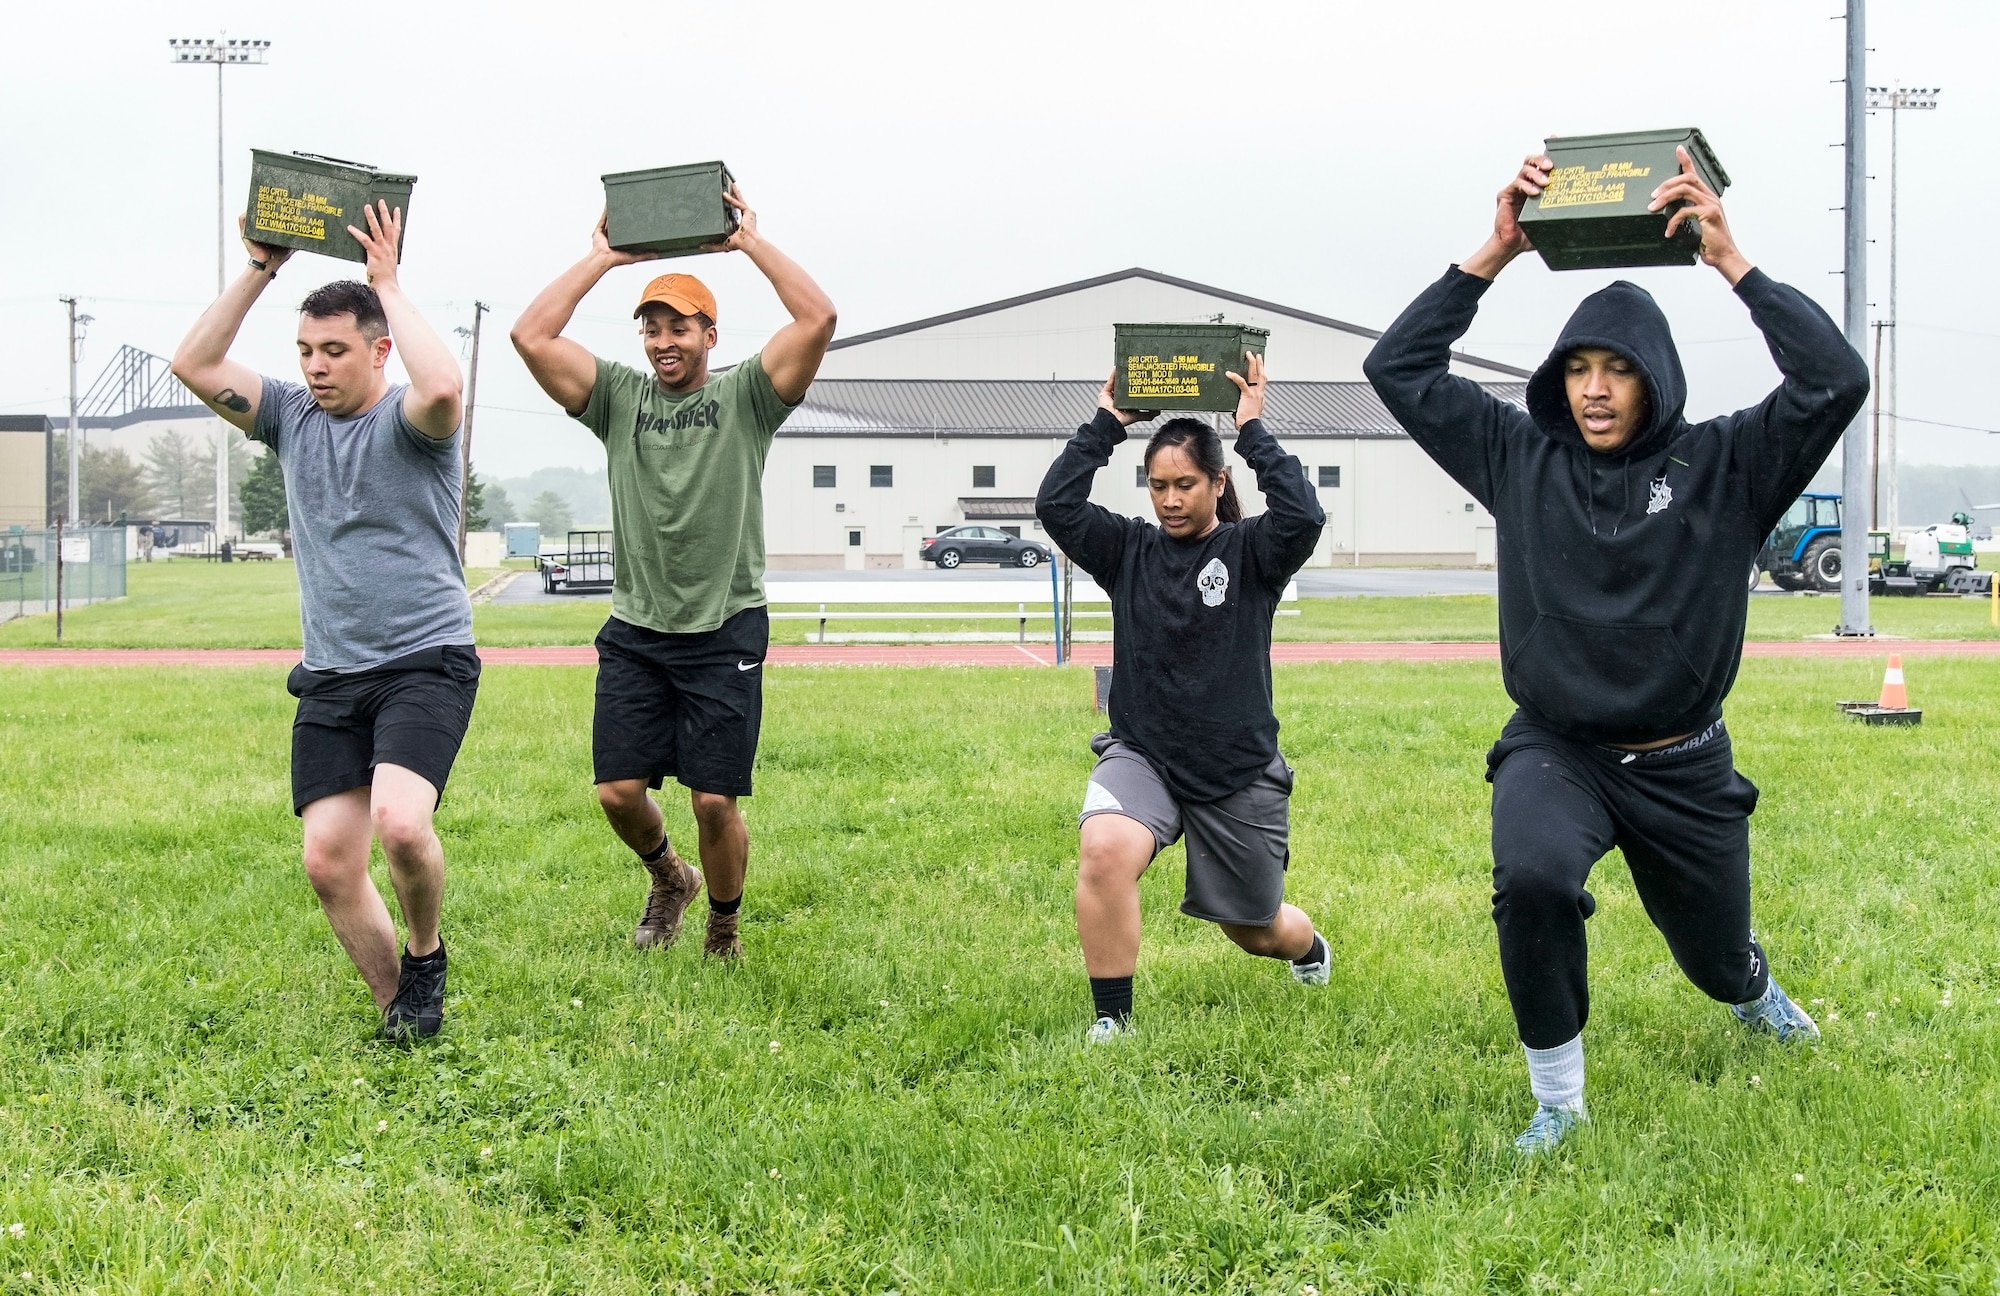 From left, Staff Sgt. Kevin Garcia, Senior Airman Norman Mosby-Hauer, Staff Sgt. Charnelle Albino and Airman 1st Class Daniel Evans, all from the 436th Security Forces Squadron, perform ammo can lunges during the Police Week Combat Fitness Challenge May 17, 2018, at Dover Air Force Base, Del. Upon completing all nine challenges, the team finished in second place posting a time of 6 minutes. (U.S. Air Force photo by Roland Balik)